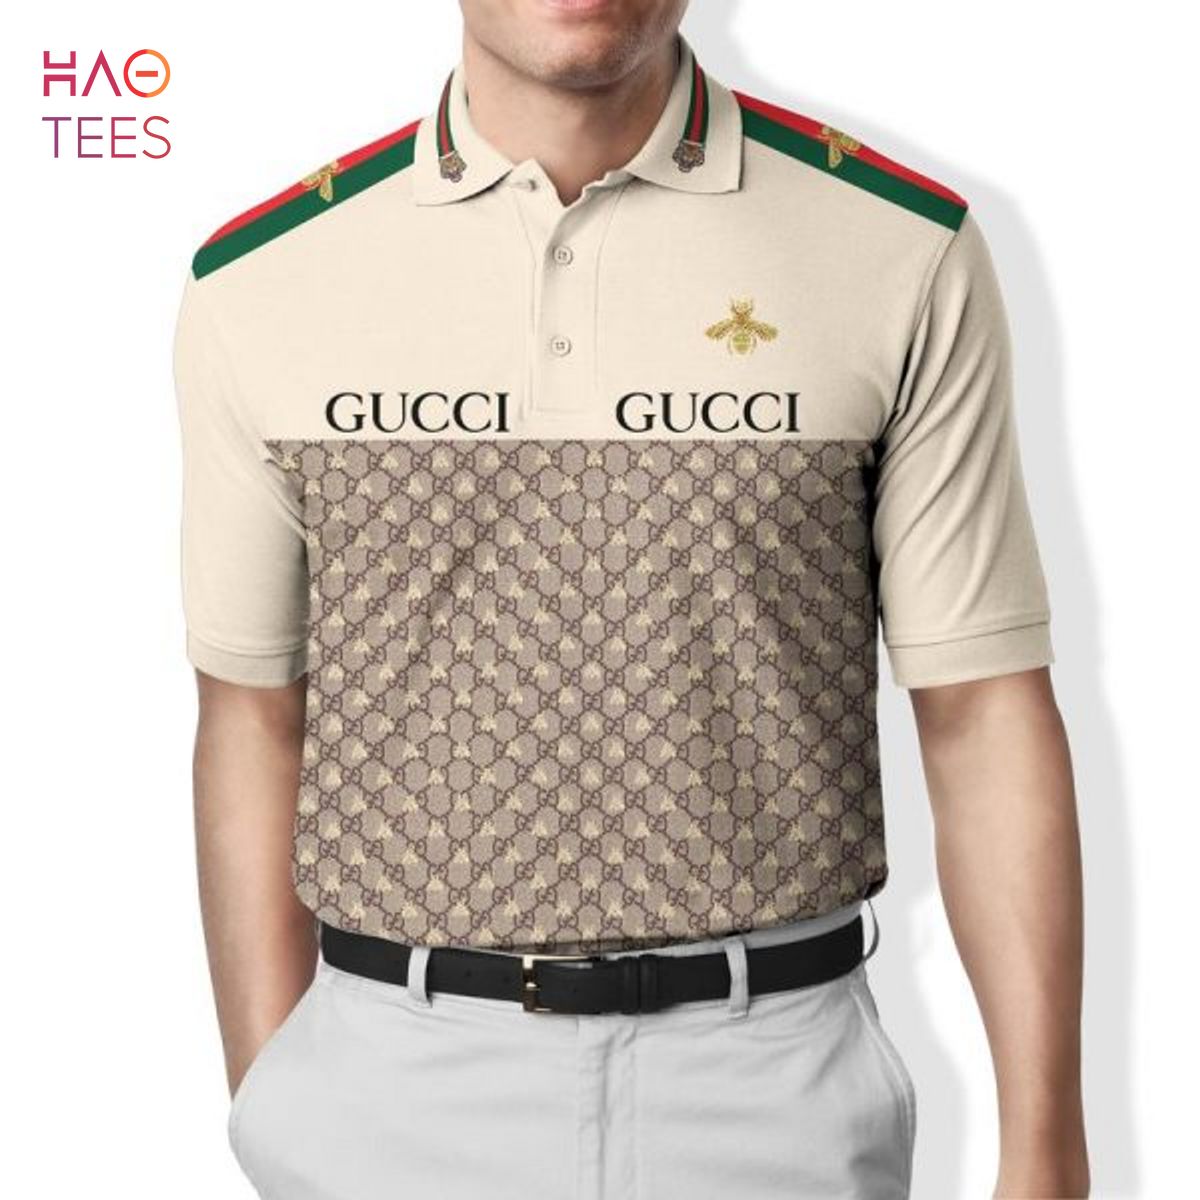 Gucci Bee Luxury Brand Polo Shirt Limited Edition